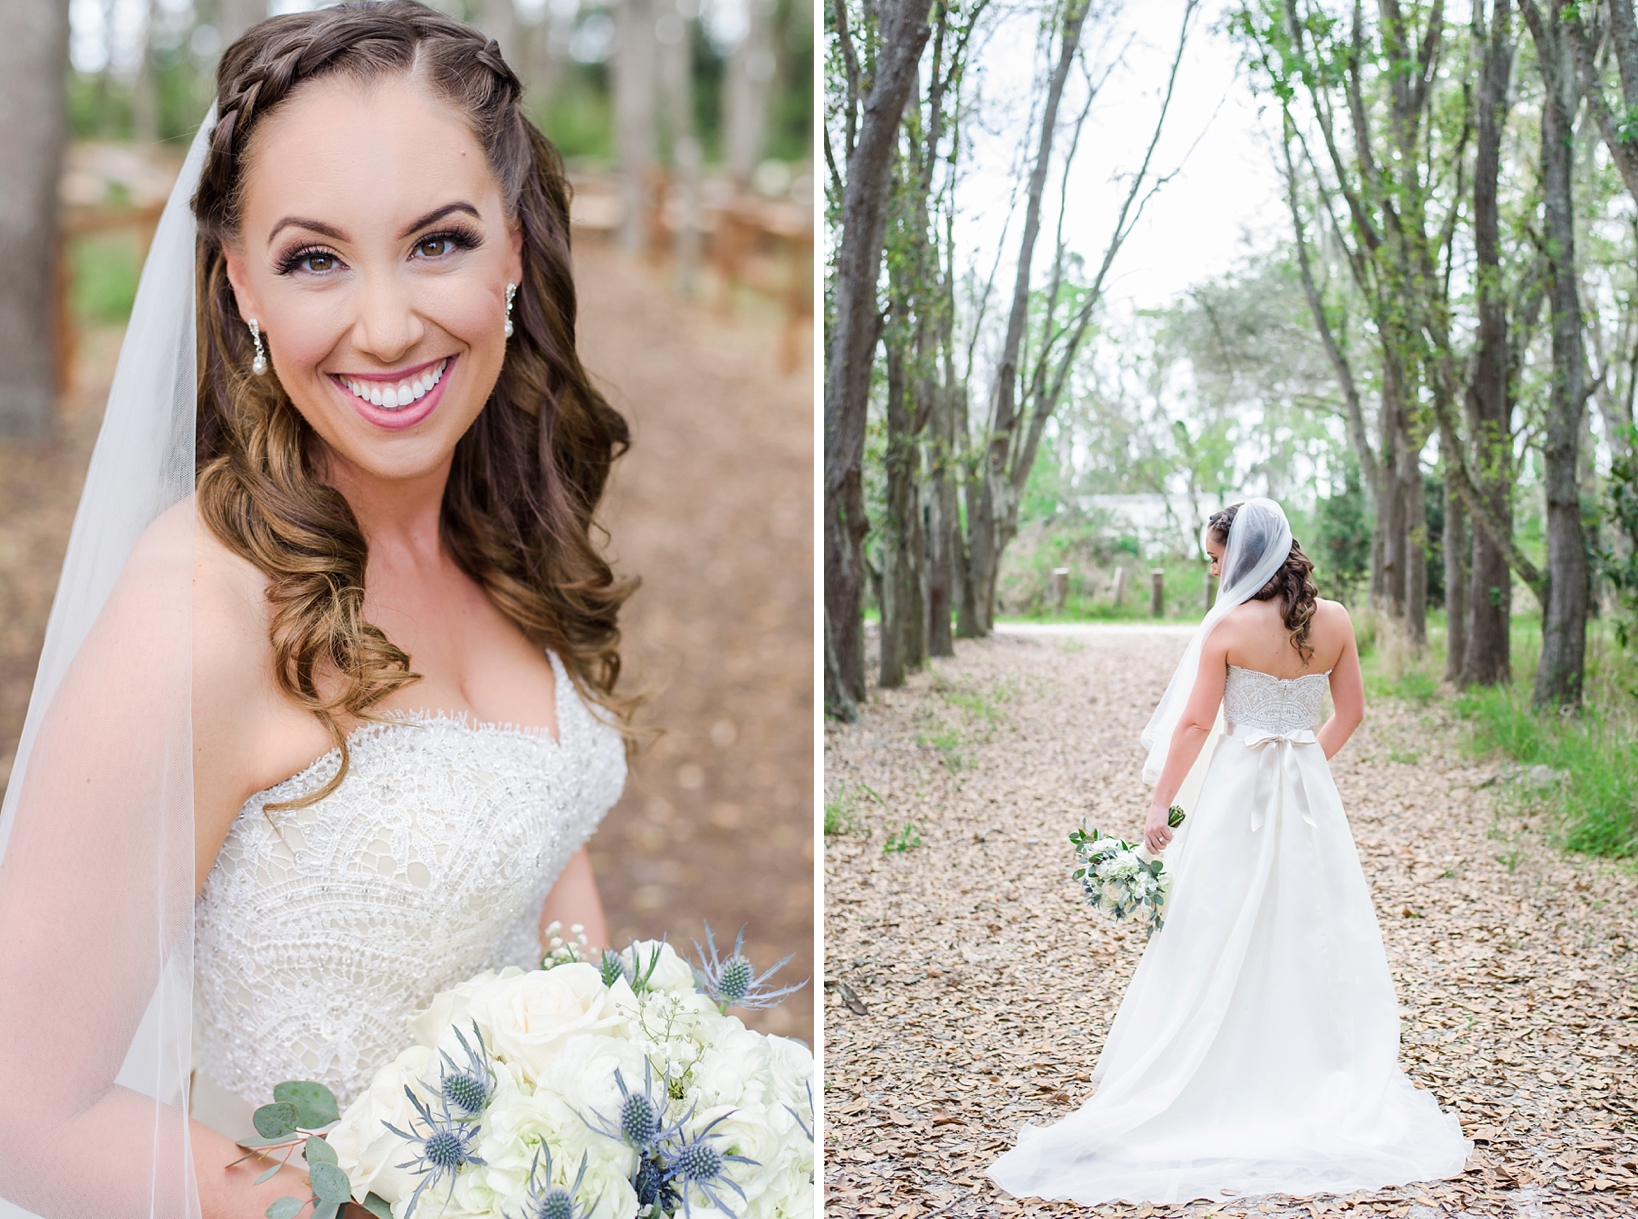 Bridal portraits amongst the trees by Sarah & Ben Photography